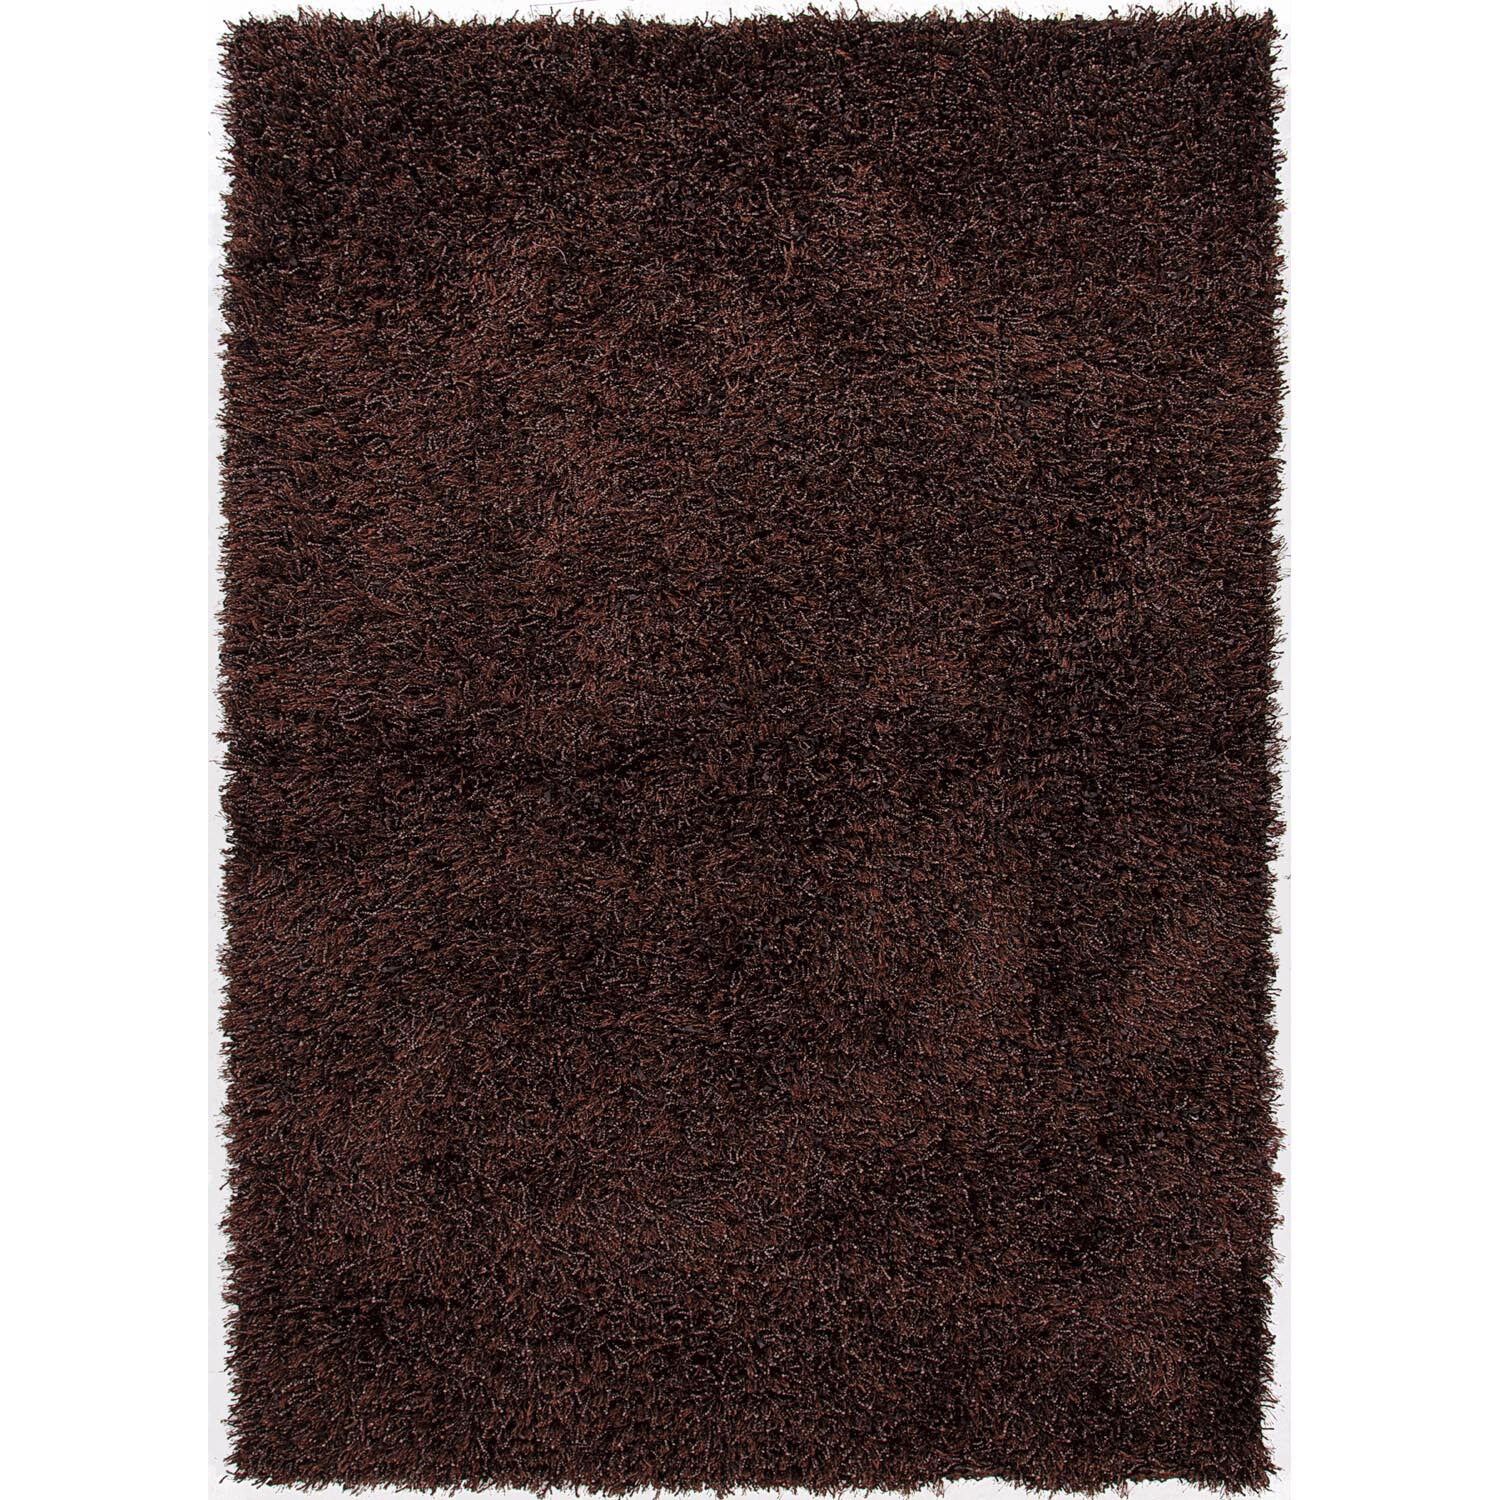 Hand woven Abstract Medium Espresso Wool Rug (36 x 56) Today $67.99